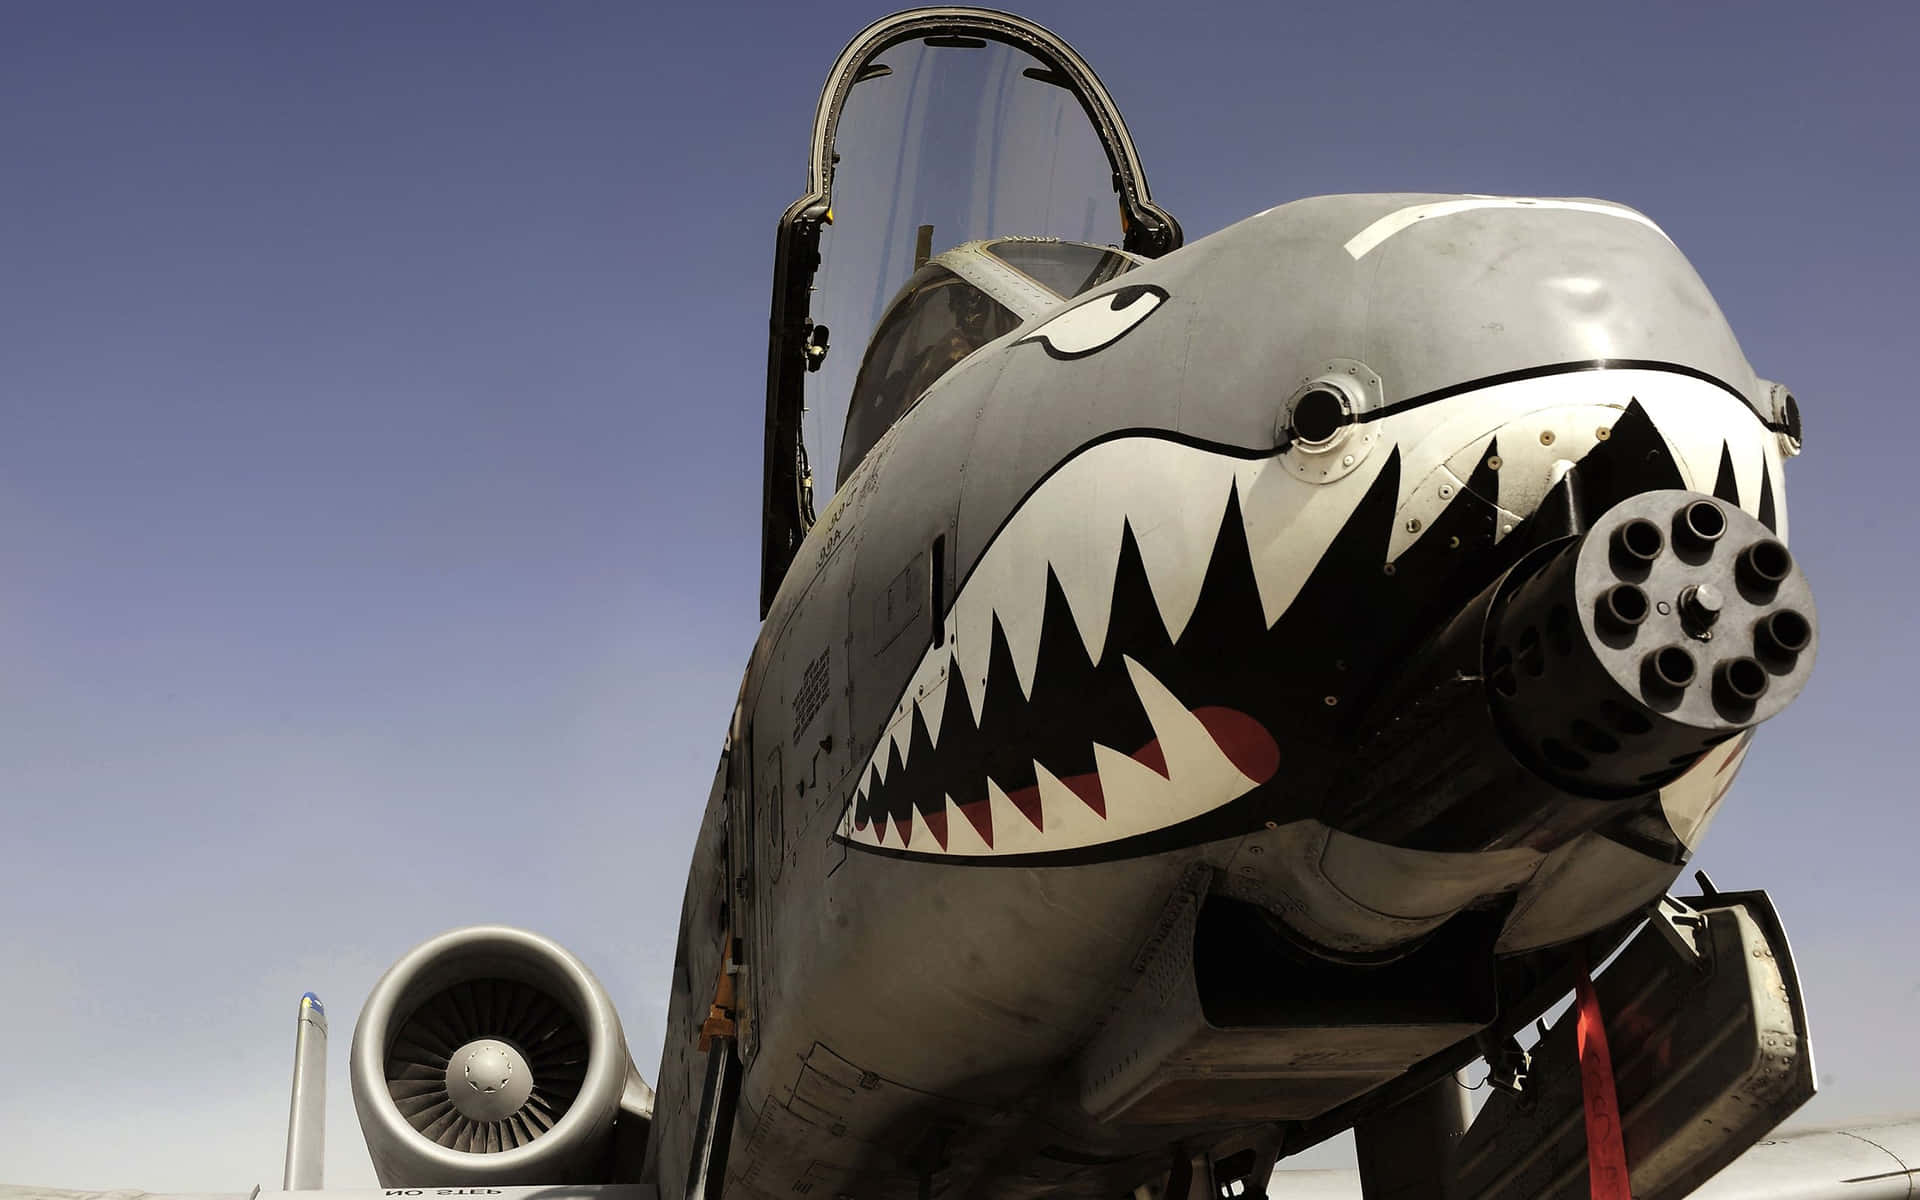 A10s Headed to CENTCOM To Bolster Air Force Presence